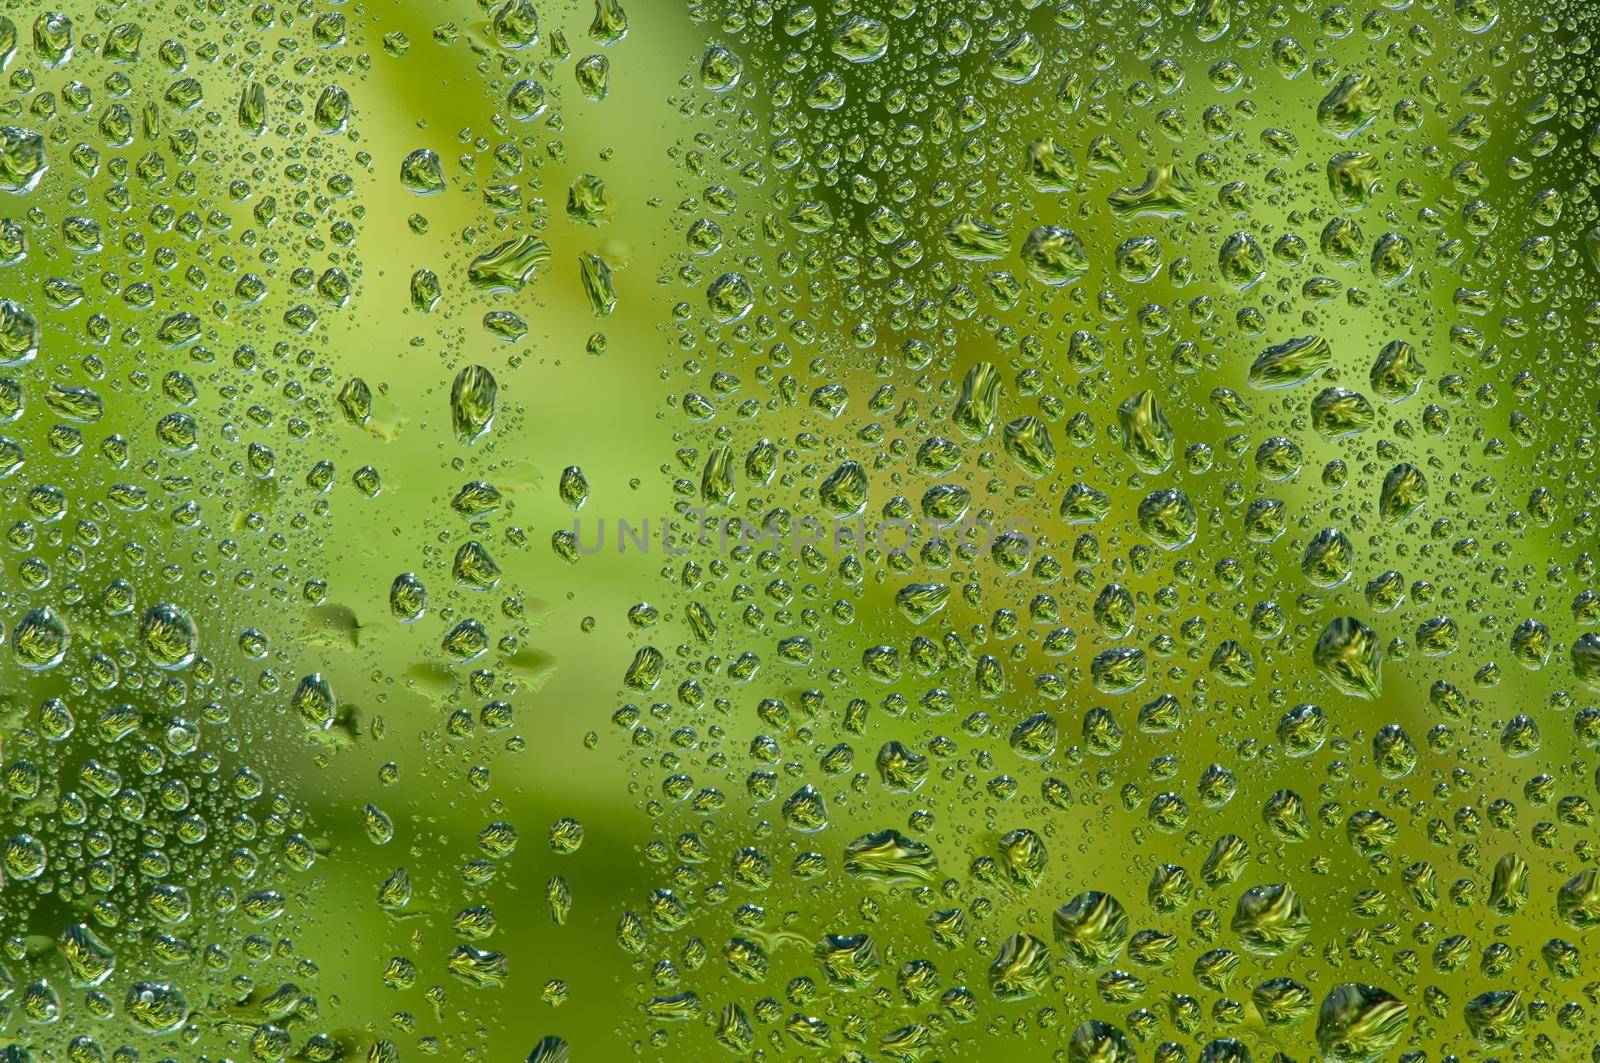 Water drop on glass window with green tree background. by thanumporn